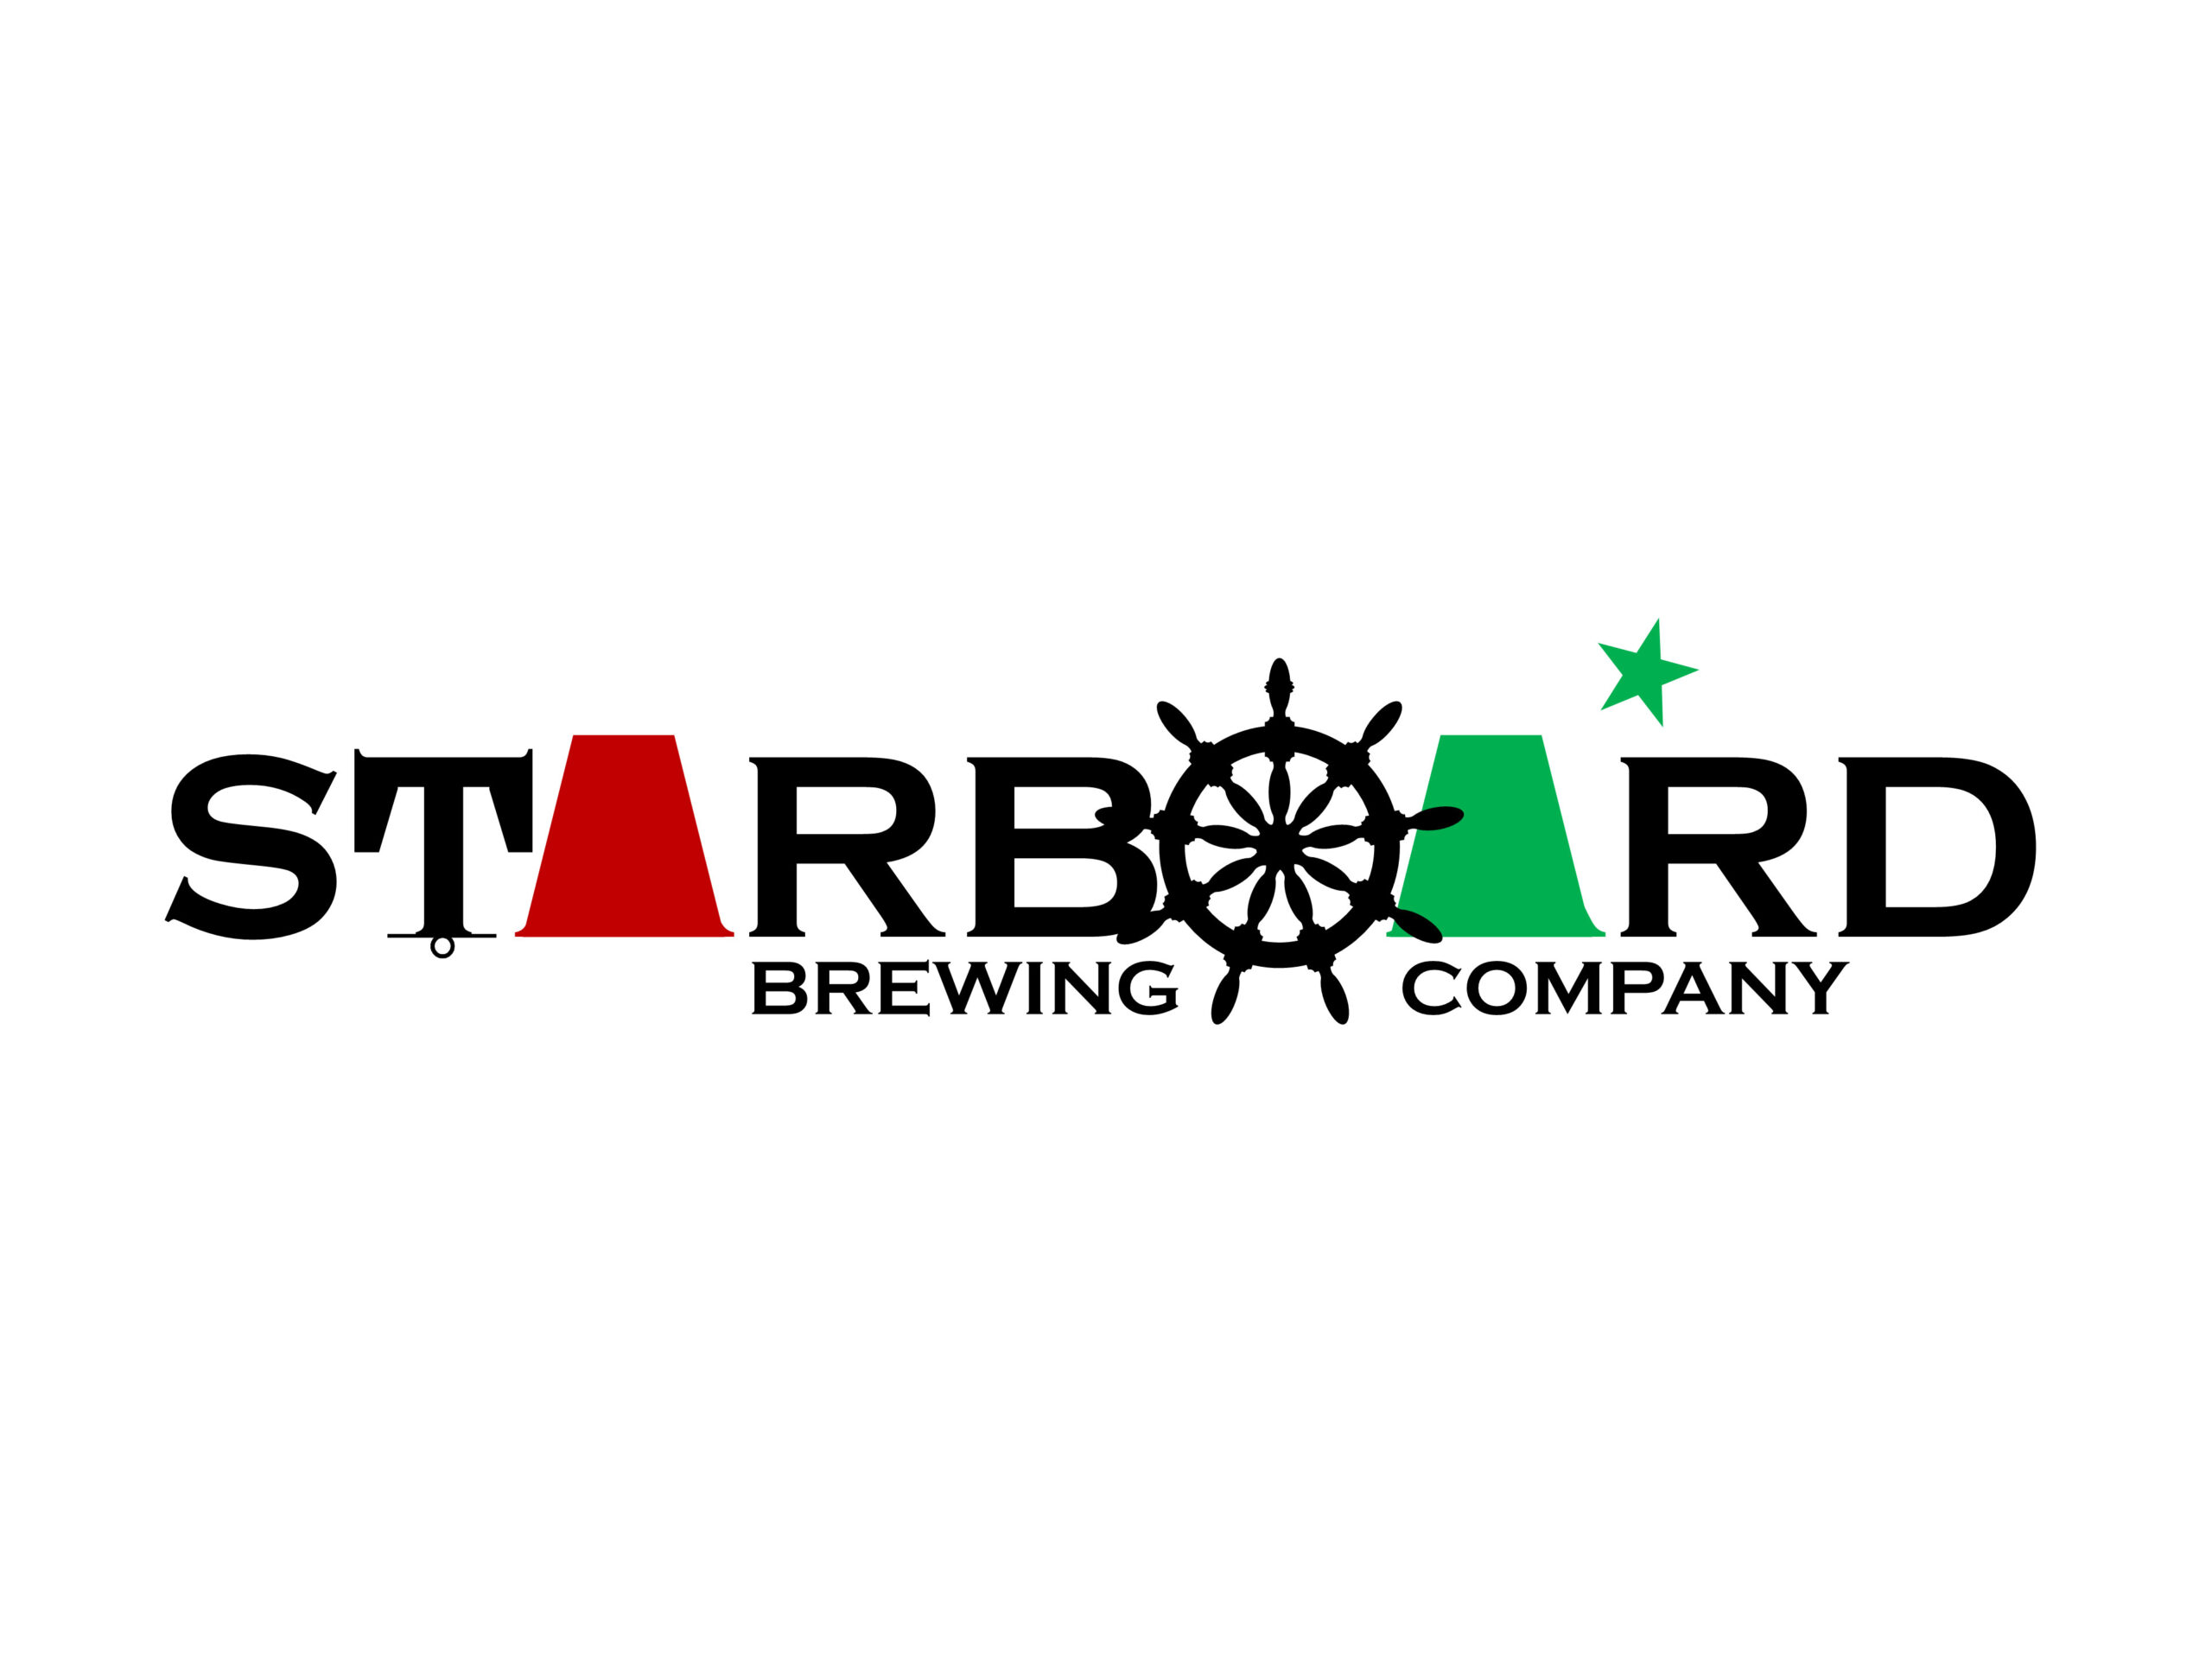 Starboard Brewing Company